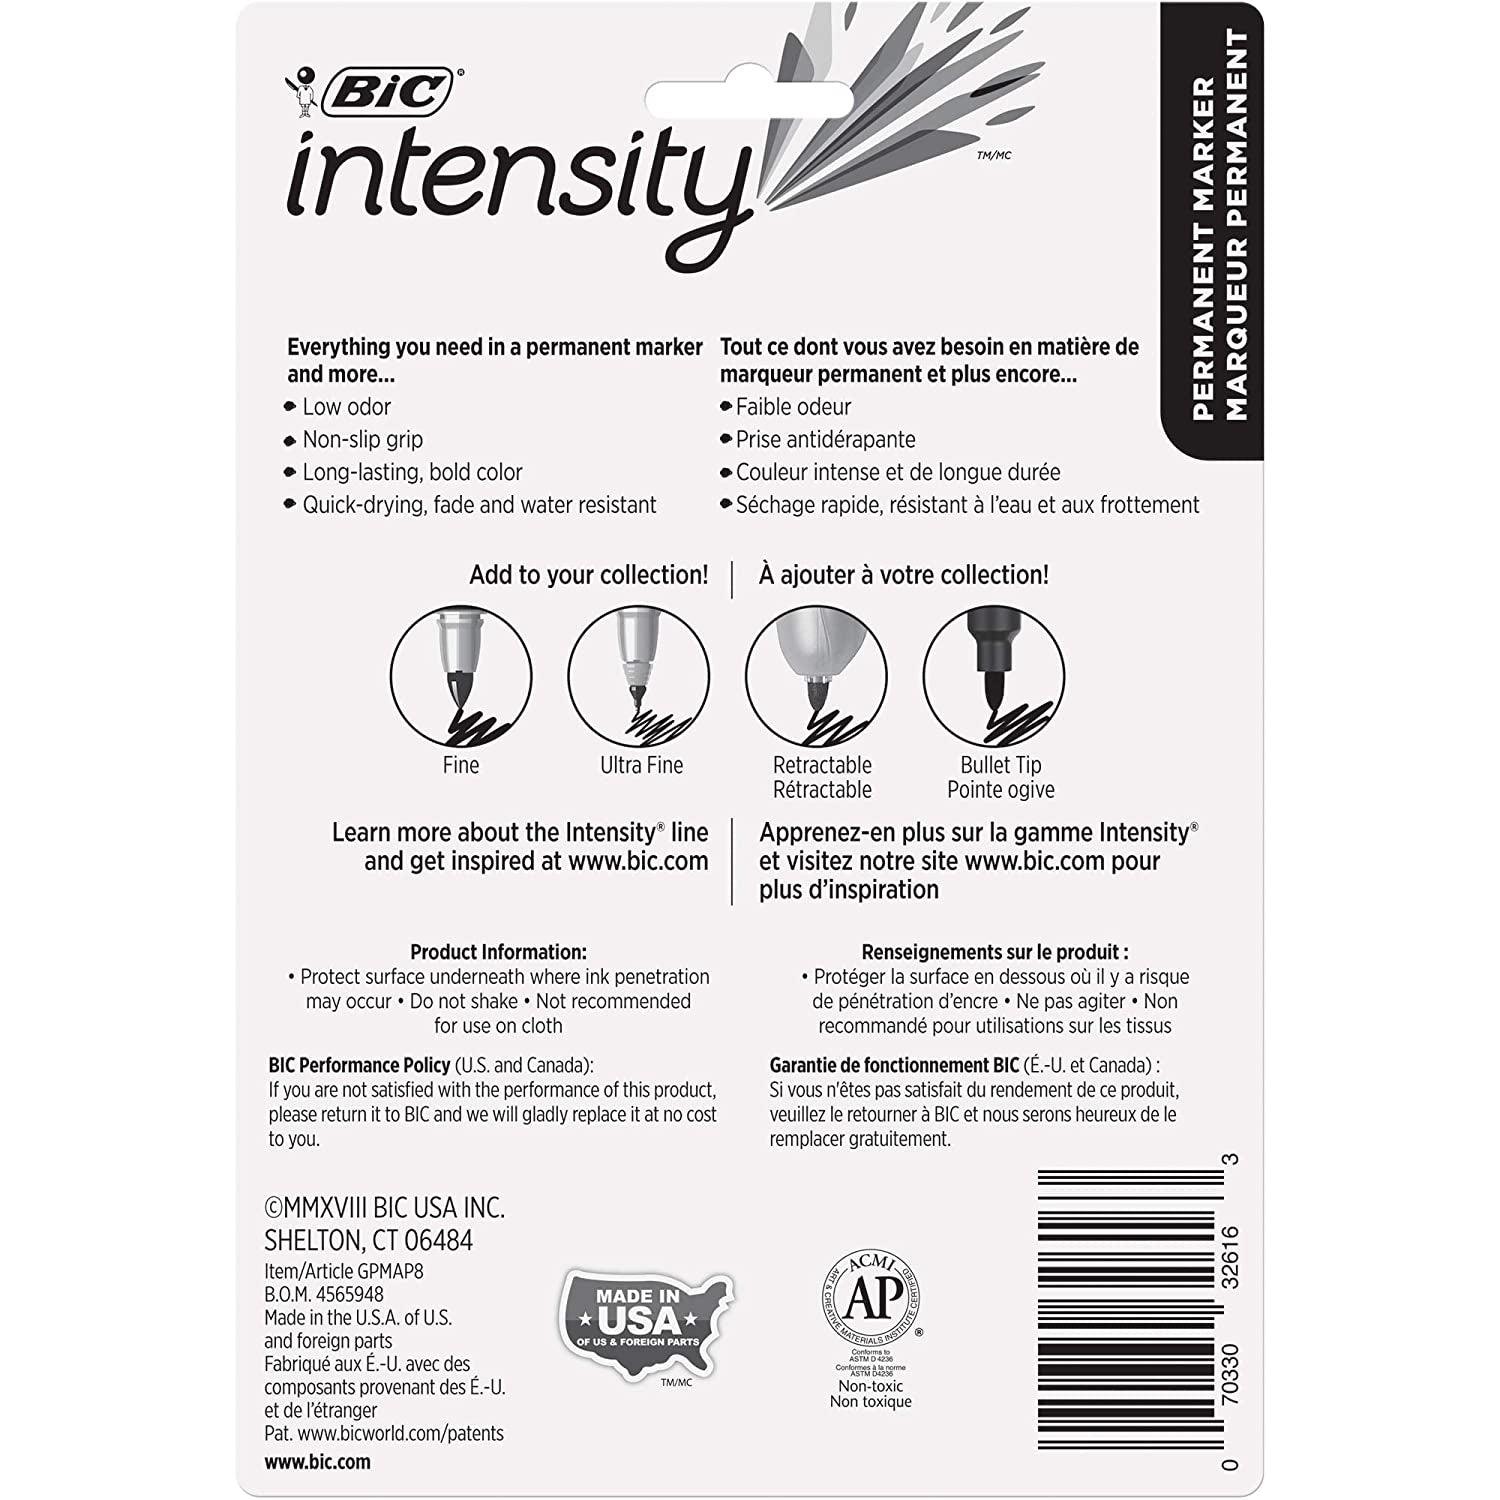 Intensity Permanent Marker, Fine Point, Assorted Colors, 8 Per Pack, 3 Packs - Loomini